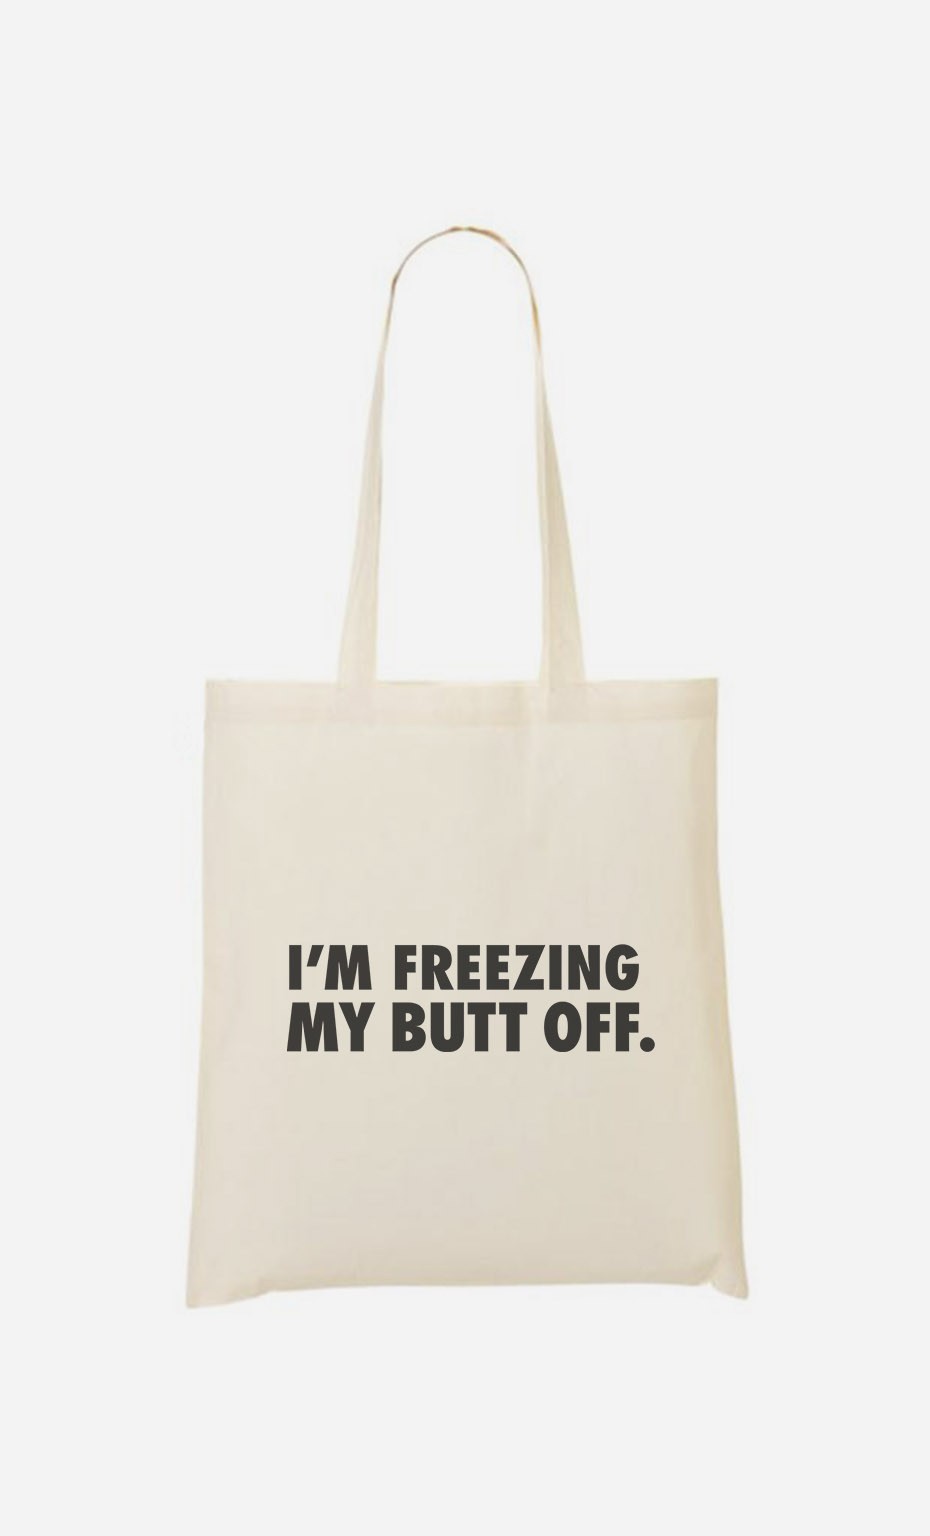 Tote Bag I'm freezing my butt off